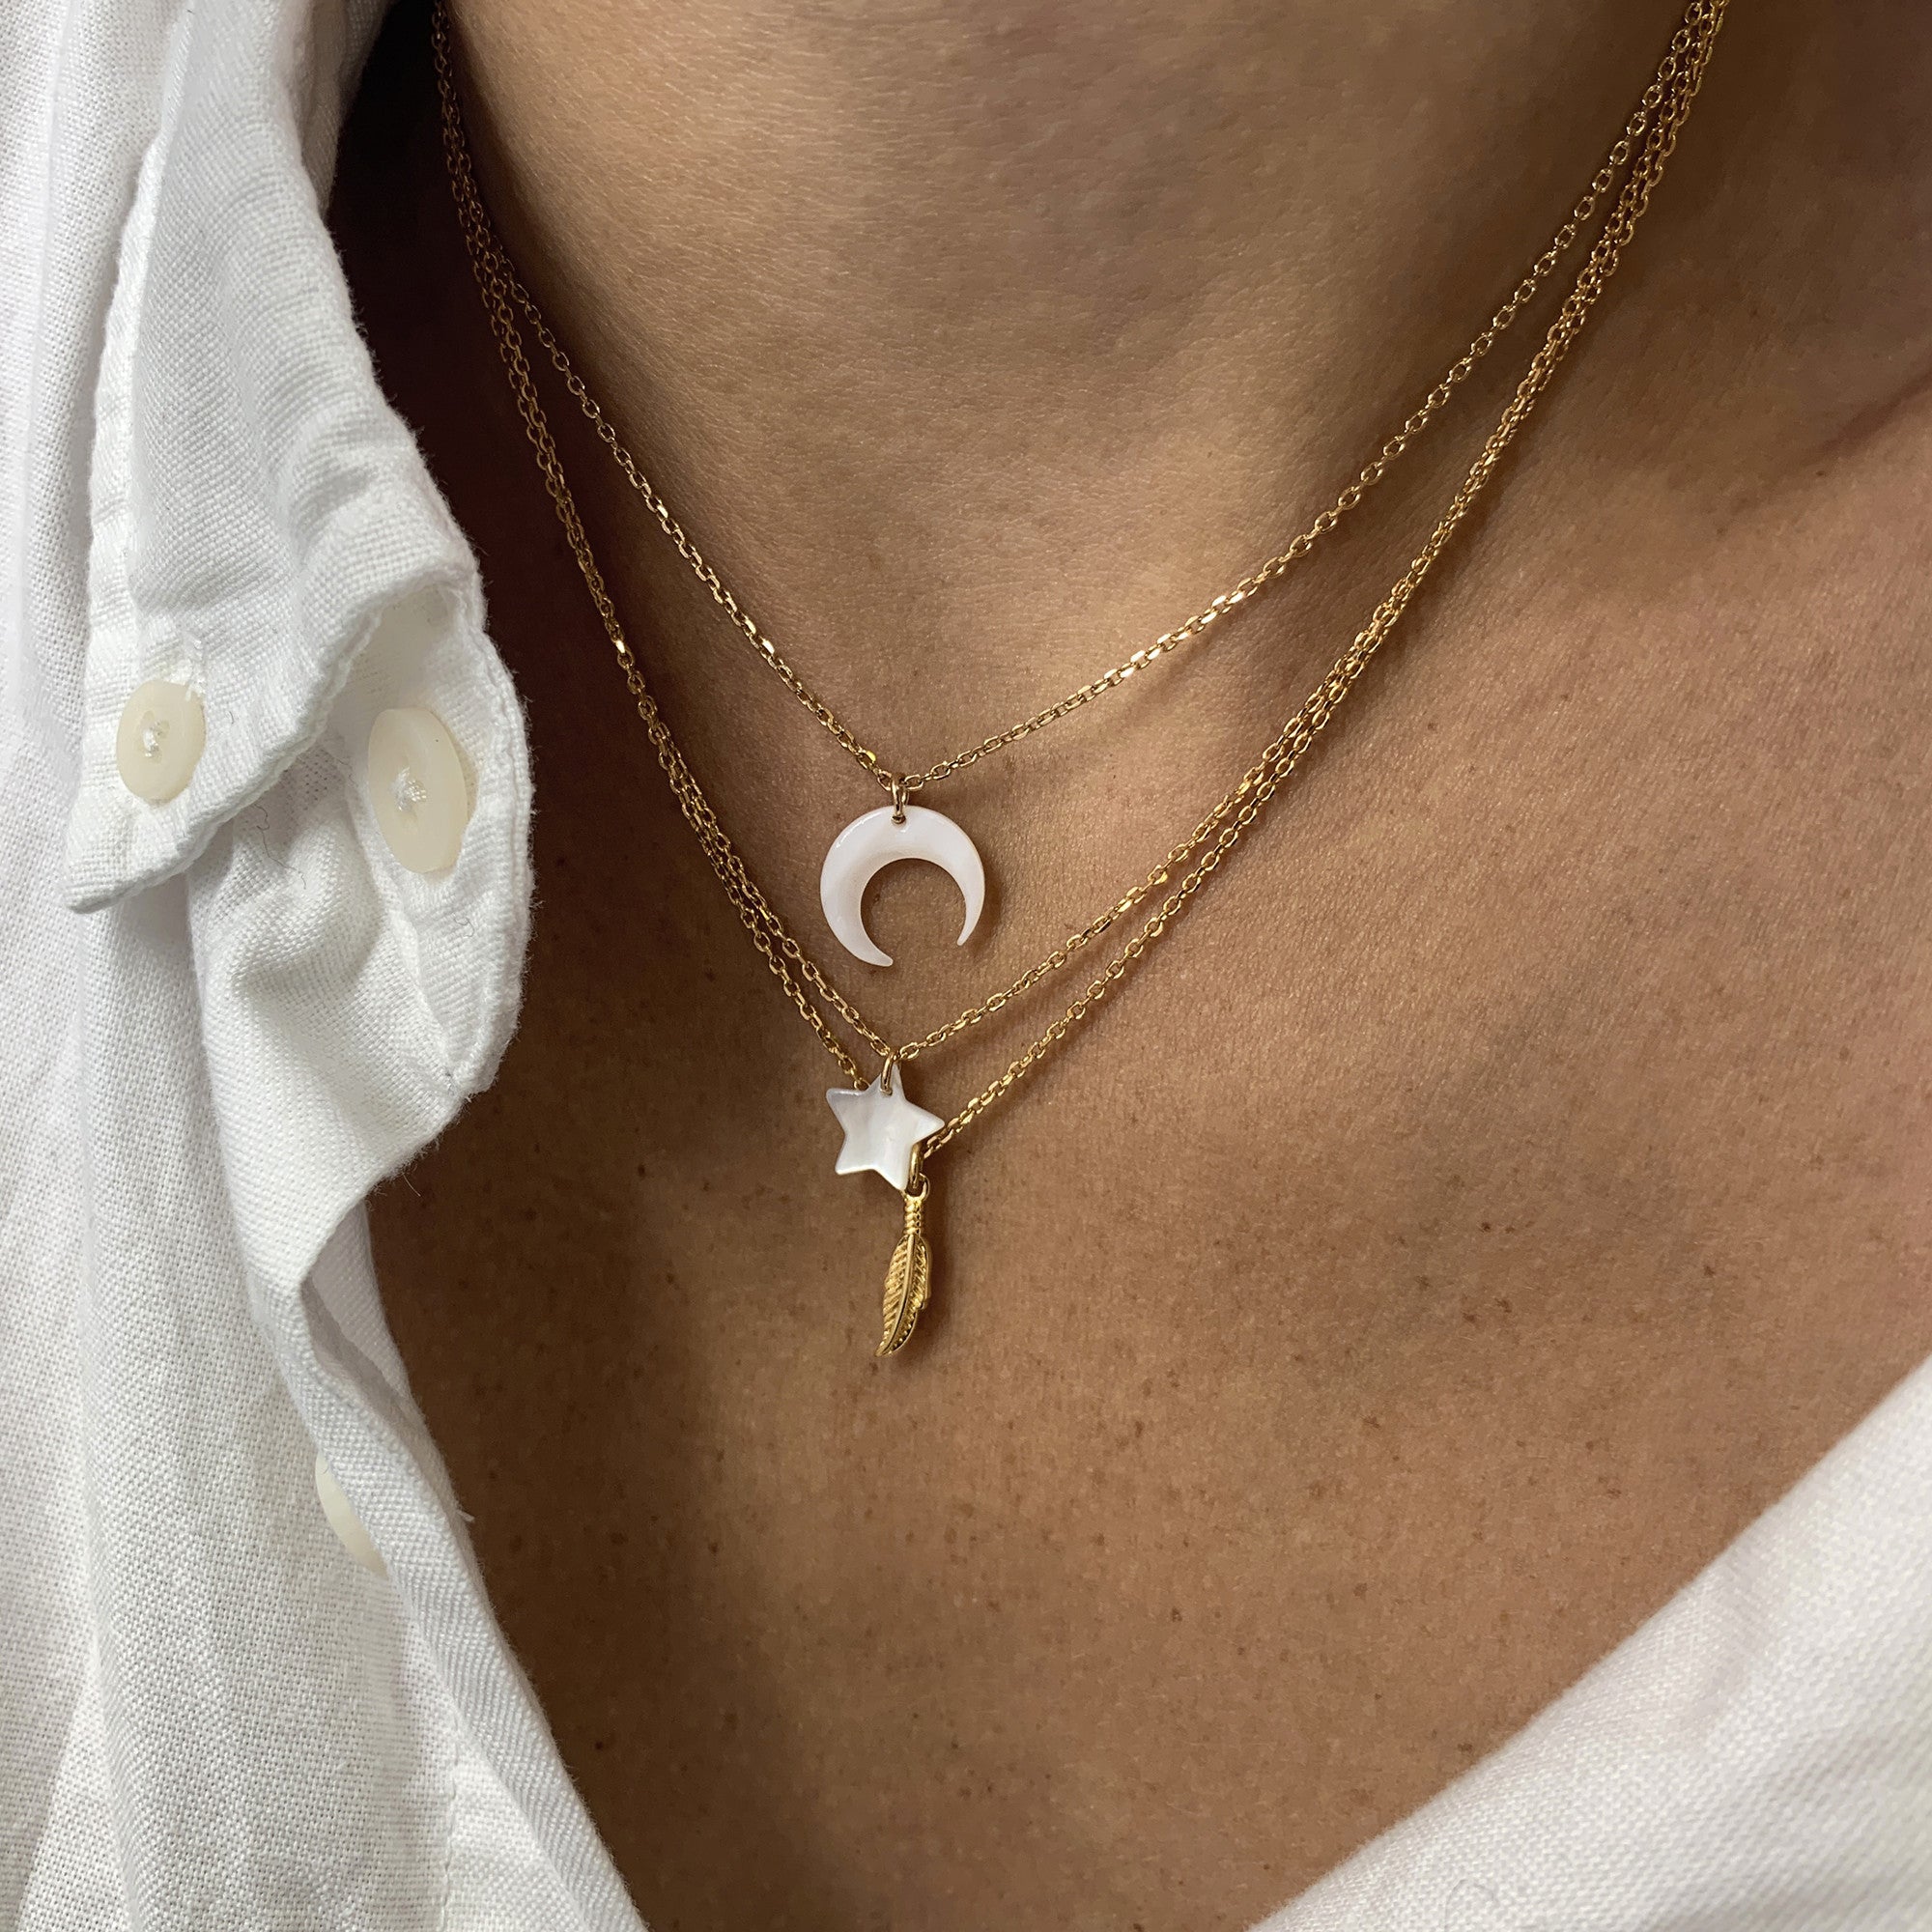 Mother-of-pearl star charm necklace